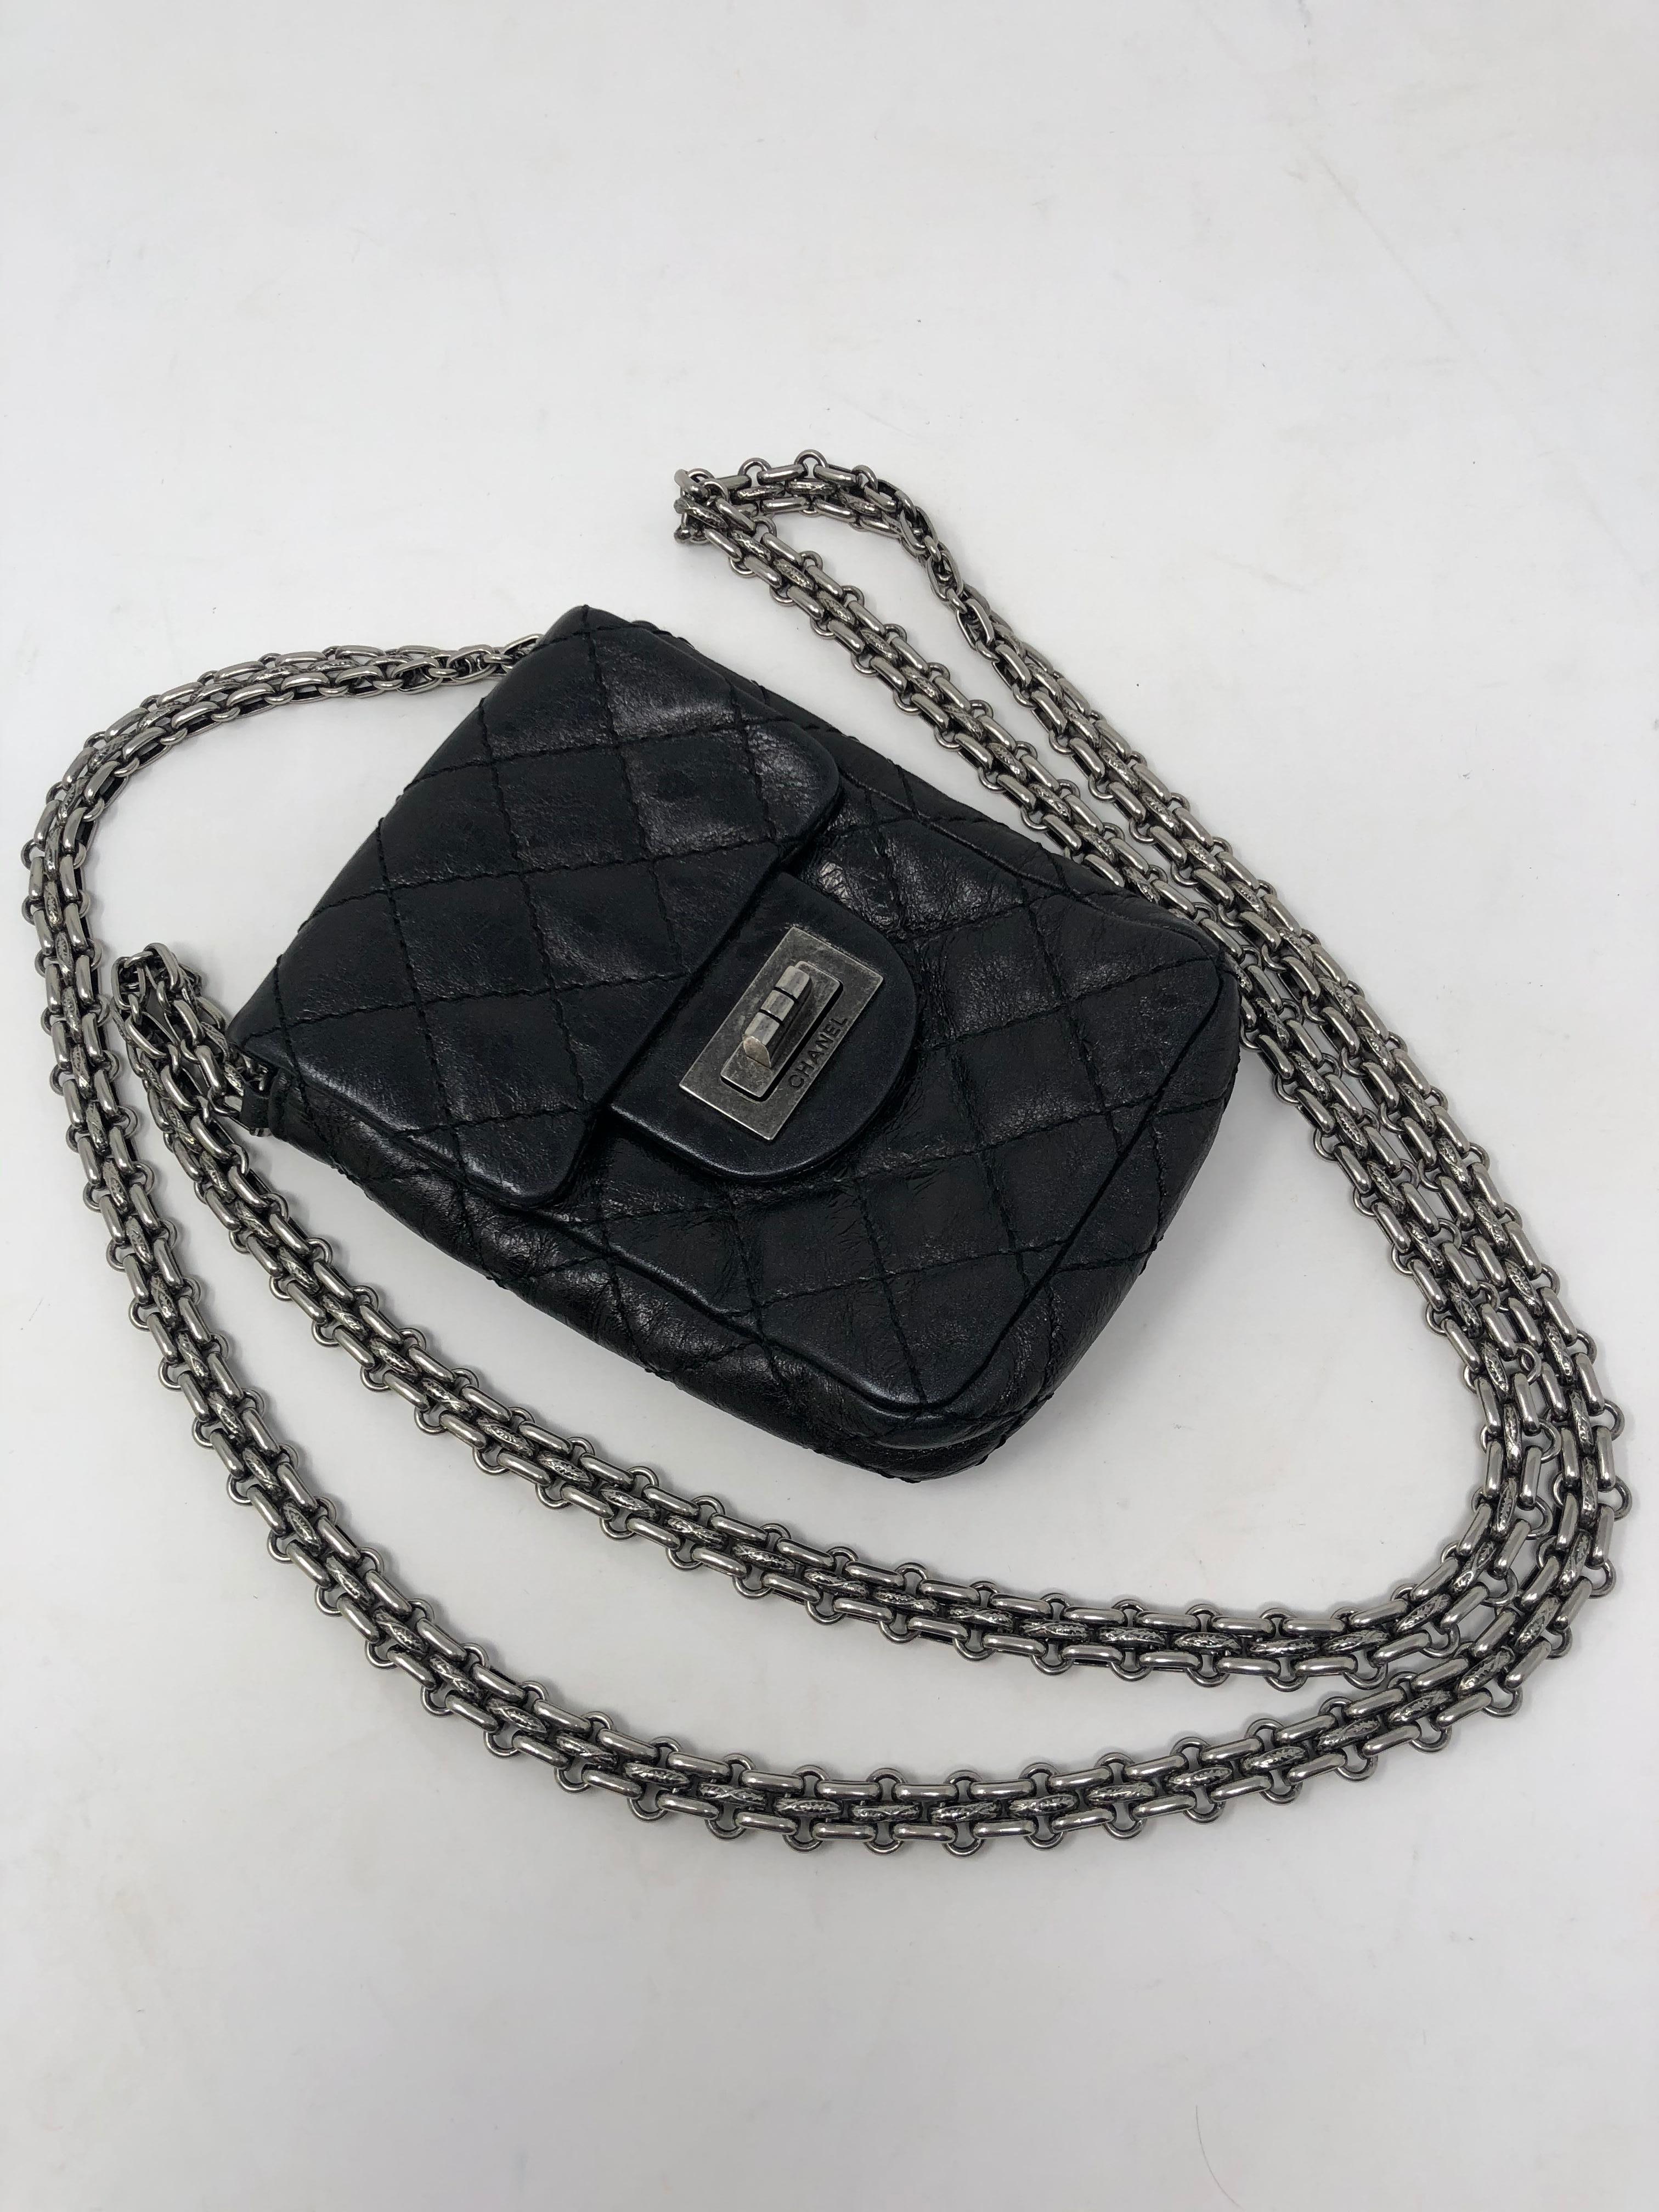 Mini Black Chanel Camera Crossbody Bag. Distressed black leather with antique silver hardware chain. Crossbody bag that will fit a small camera. Excellent condition. Rare style. Guaranteed authentic. 